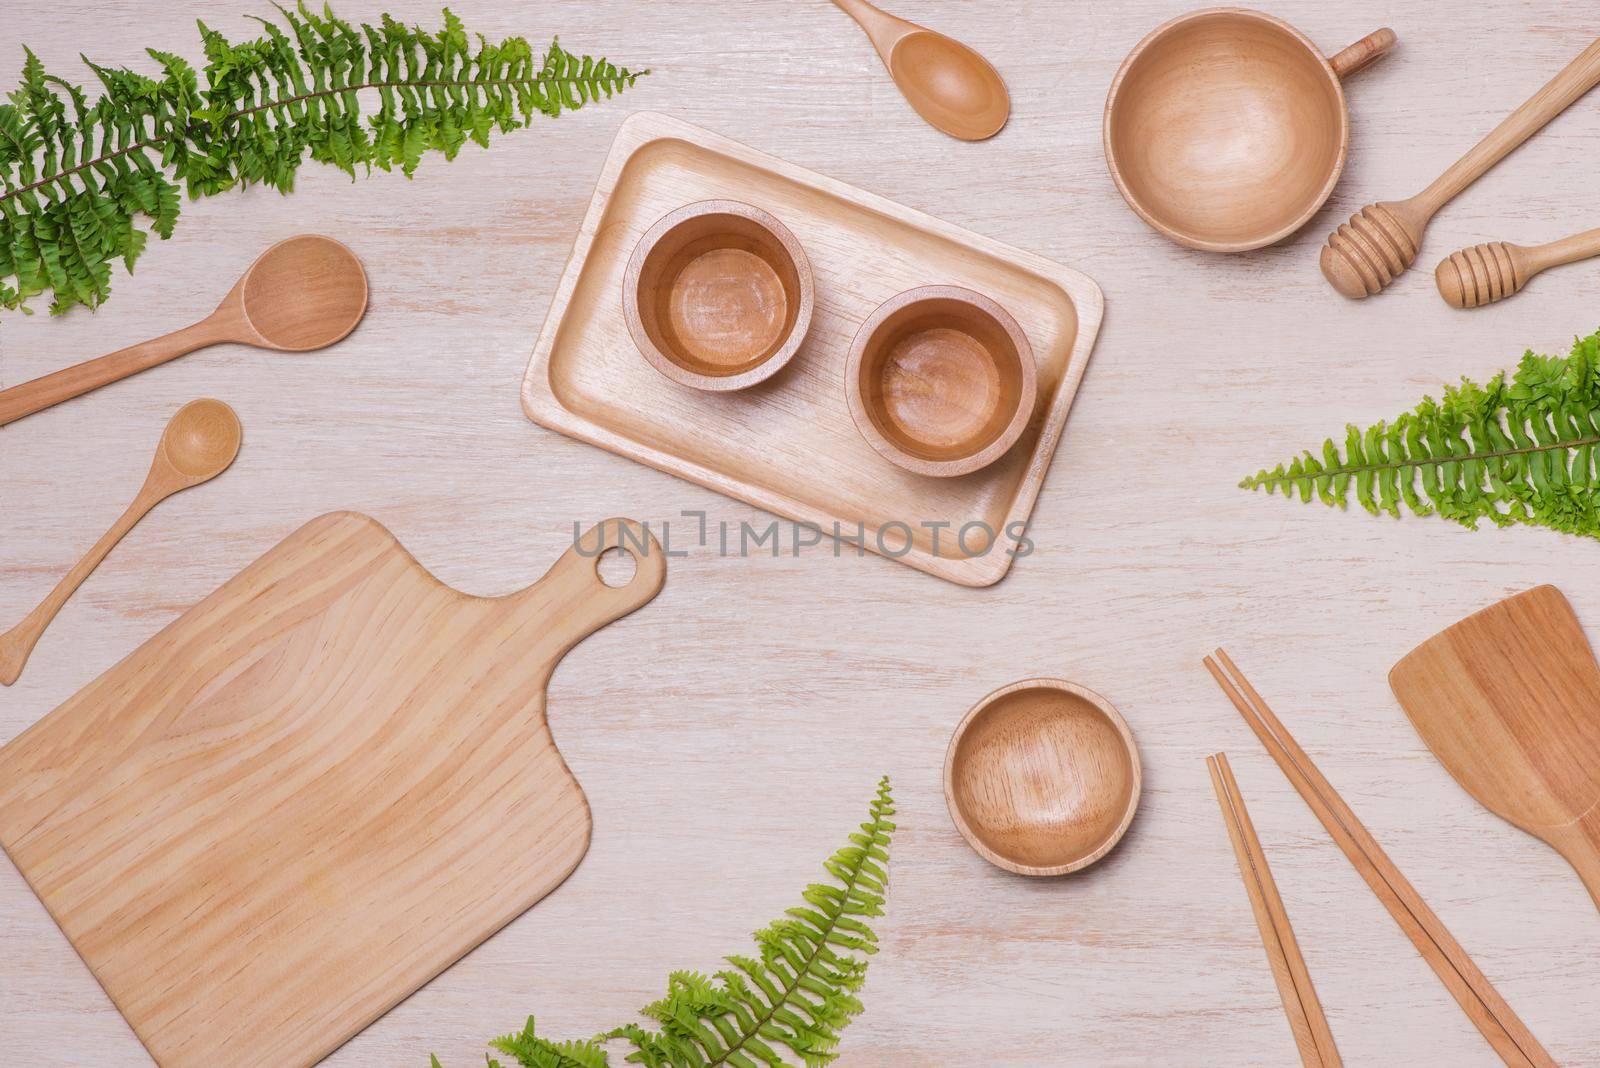 Design concept of mockup arious kitchenware utensils set on table.